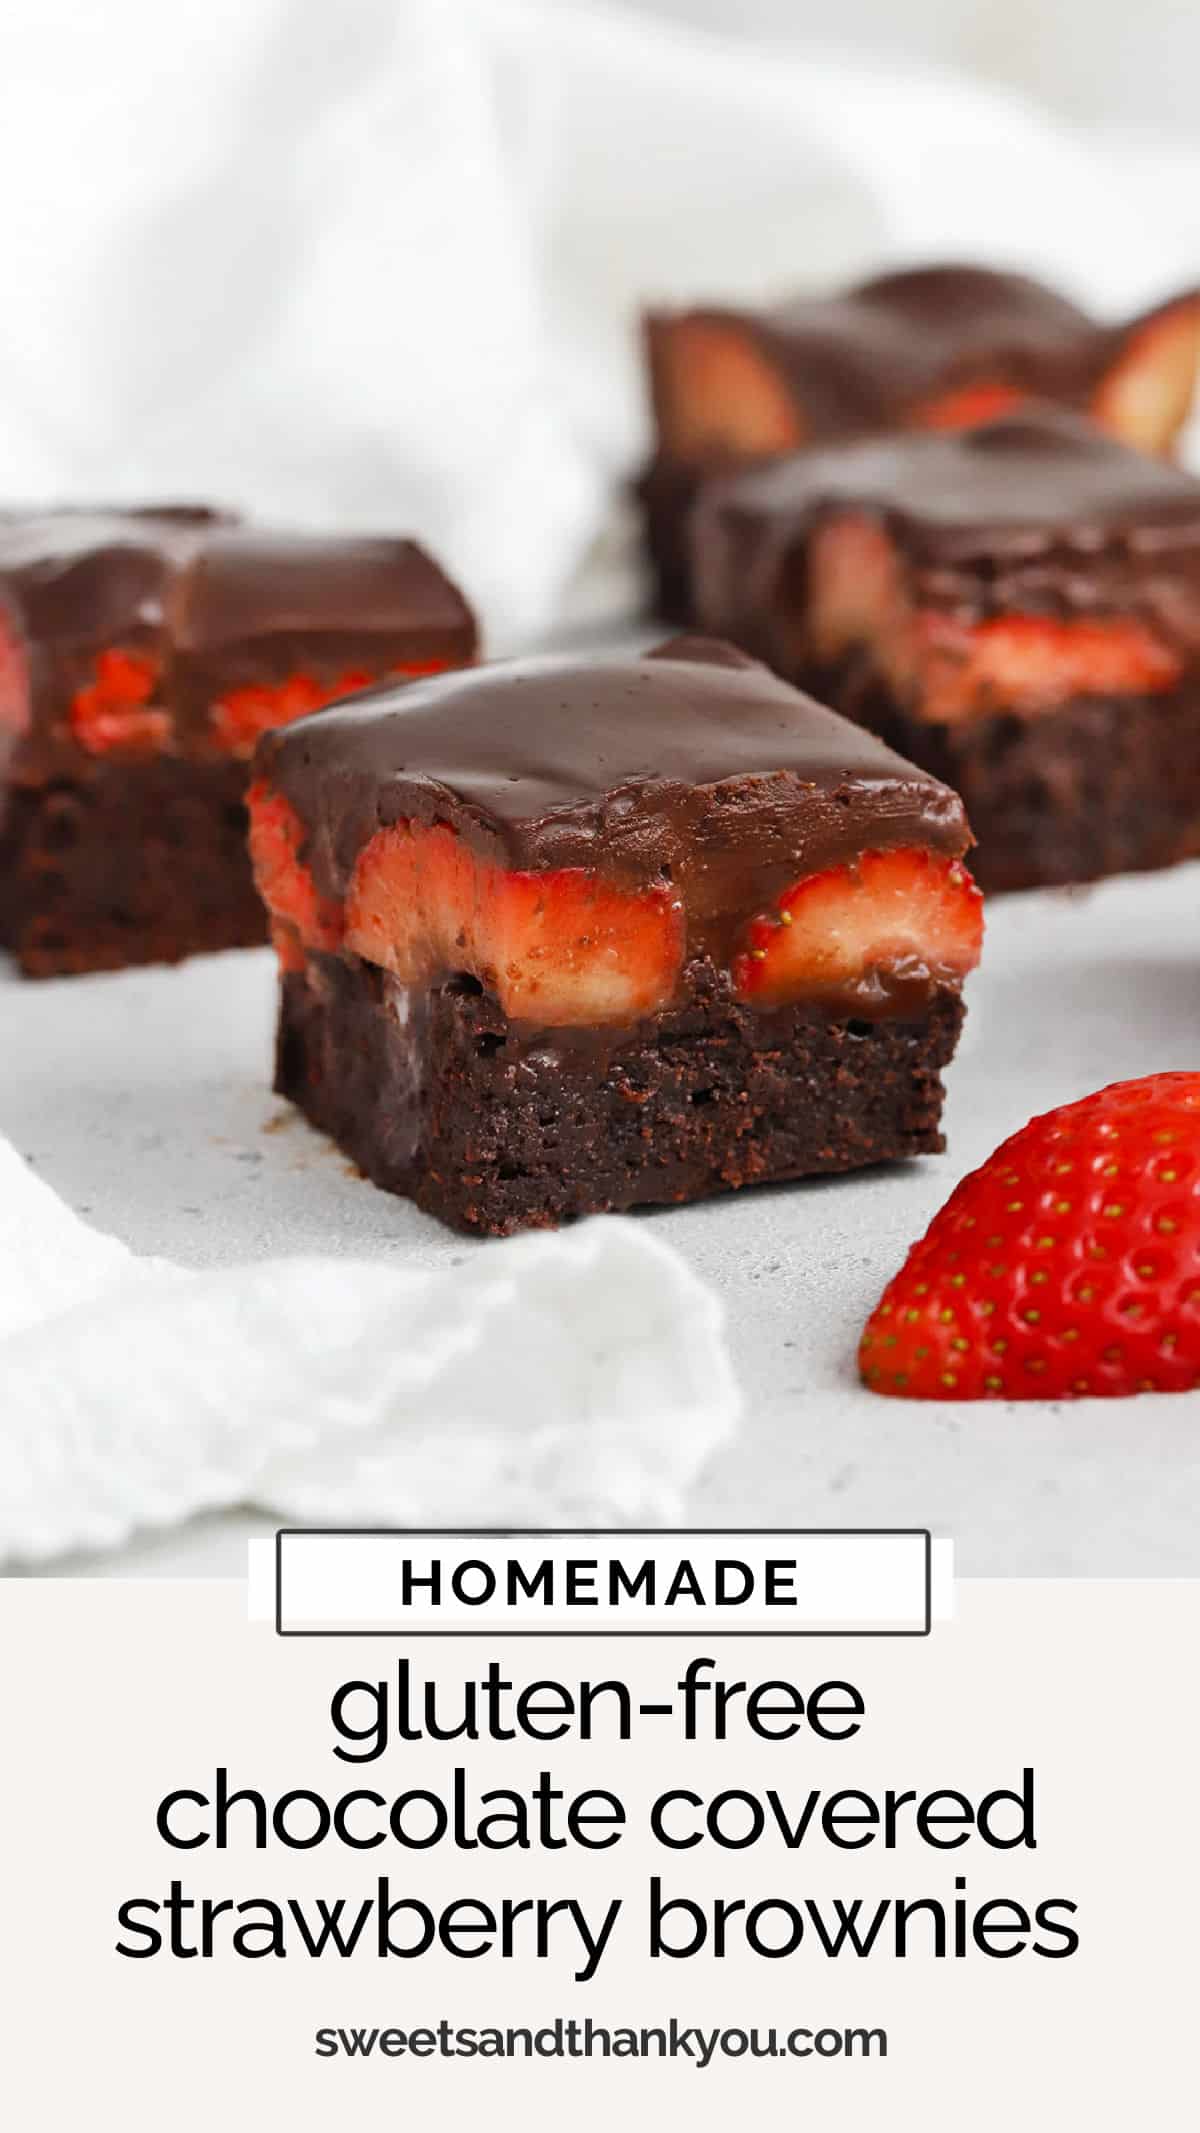 Gluten-Free Chocolate Covered Strawberry Brownies - Fudgy gluten-free brownies are topped with fresh, ripe strawberries and a glorious chocolate ganache that'll make your heart sing! // gluten-free strawberry brownies // gluten-free valentine's brownies // gluten-free dessert // valentines dessert // strawberry brownie recipe // Sweets And Thank You brownie recipe / chocolate strawberry brownies / gluten free valentine's day dessert